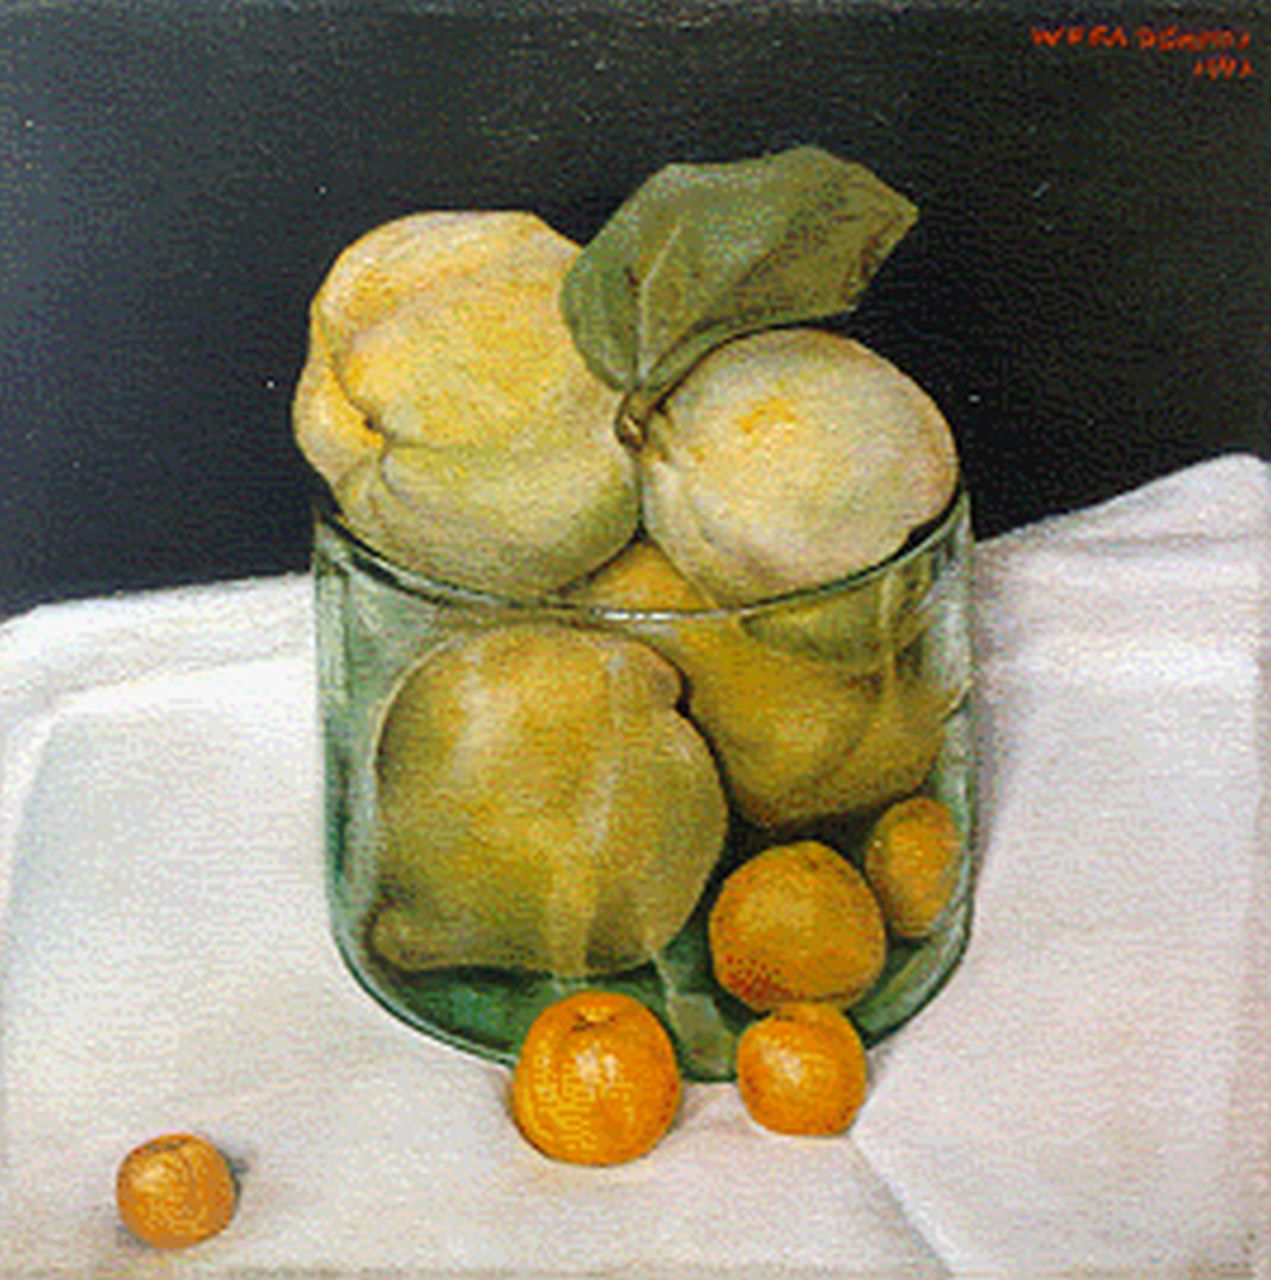 Schmid-Wittenberg W.M.J.  | 'Wera' Maria Josefine Schmid-Wittenberg, Still life with quinces and abricots, oil on canvas 25.5 x 25.2 cm, signed u.r. and dated 1947